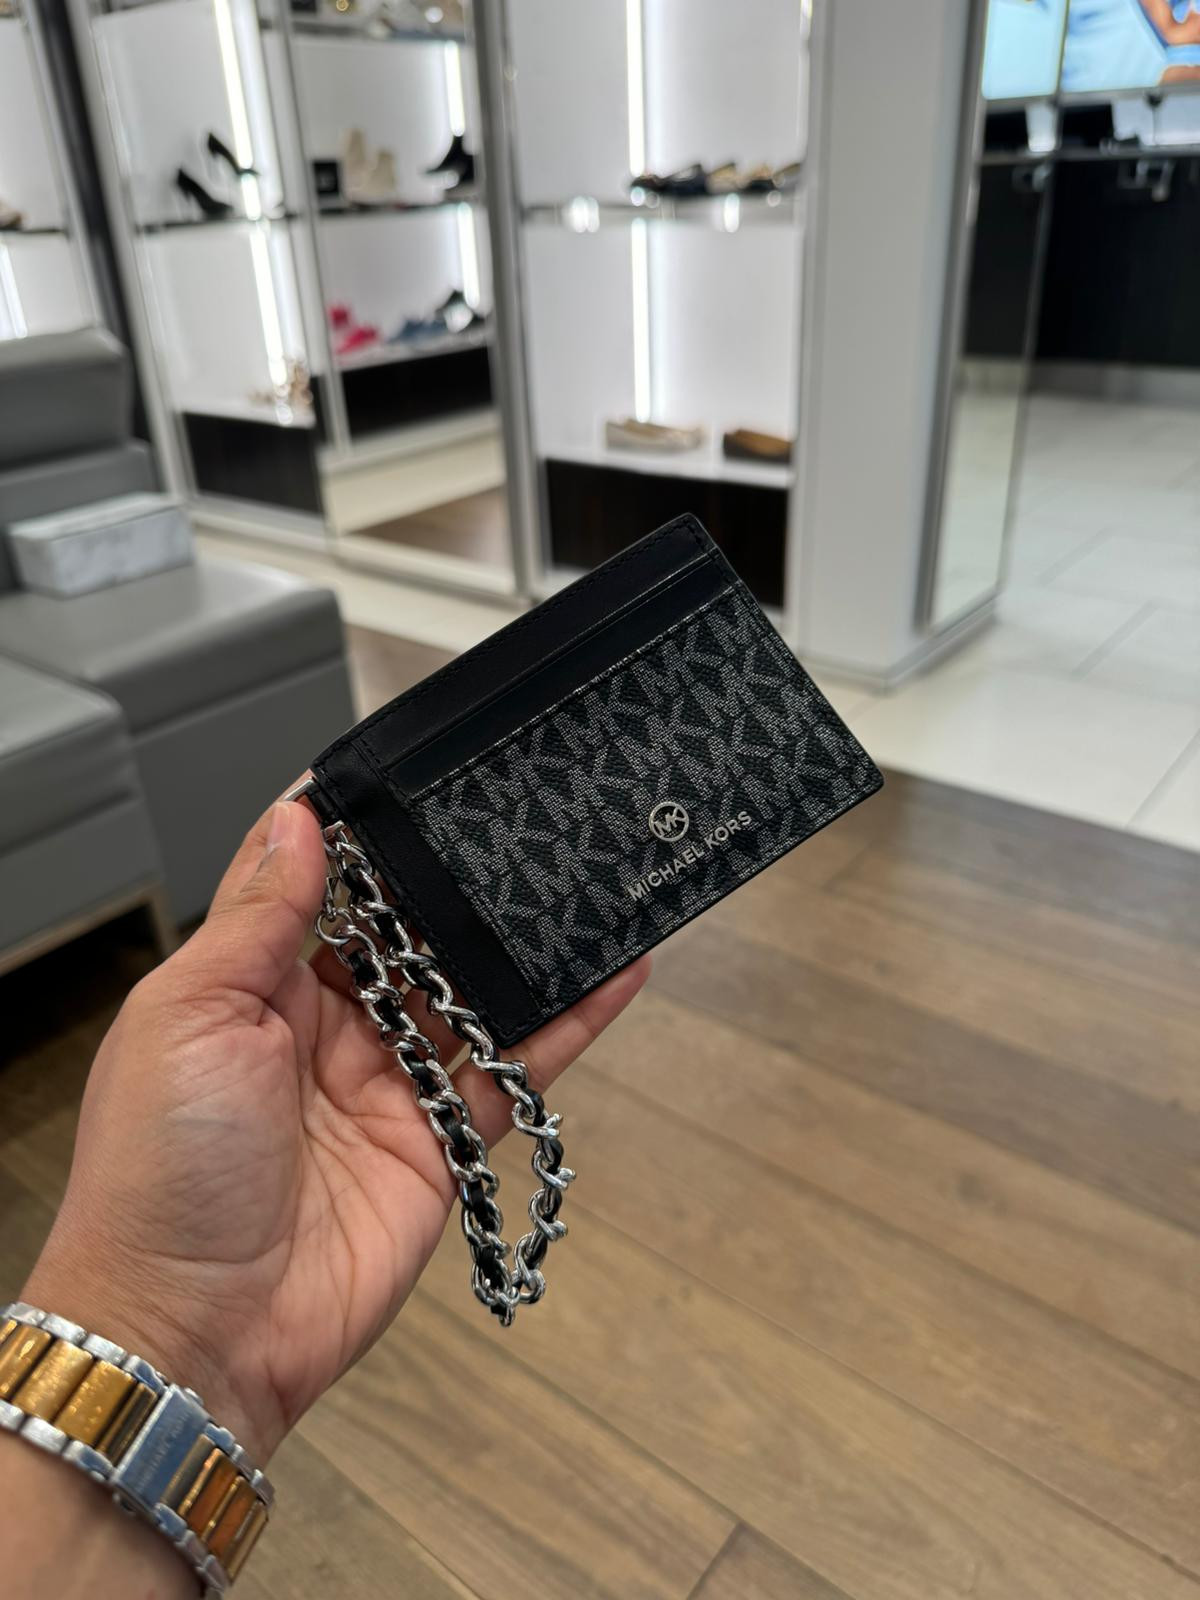 MICHAEL KORS CARD CASE WITH CHAIN - BLACK/SILVER - 34F2ST9D50 / 11.5 X 8 CM